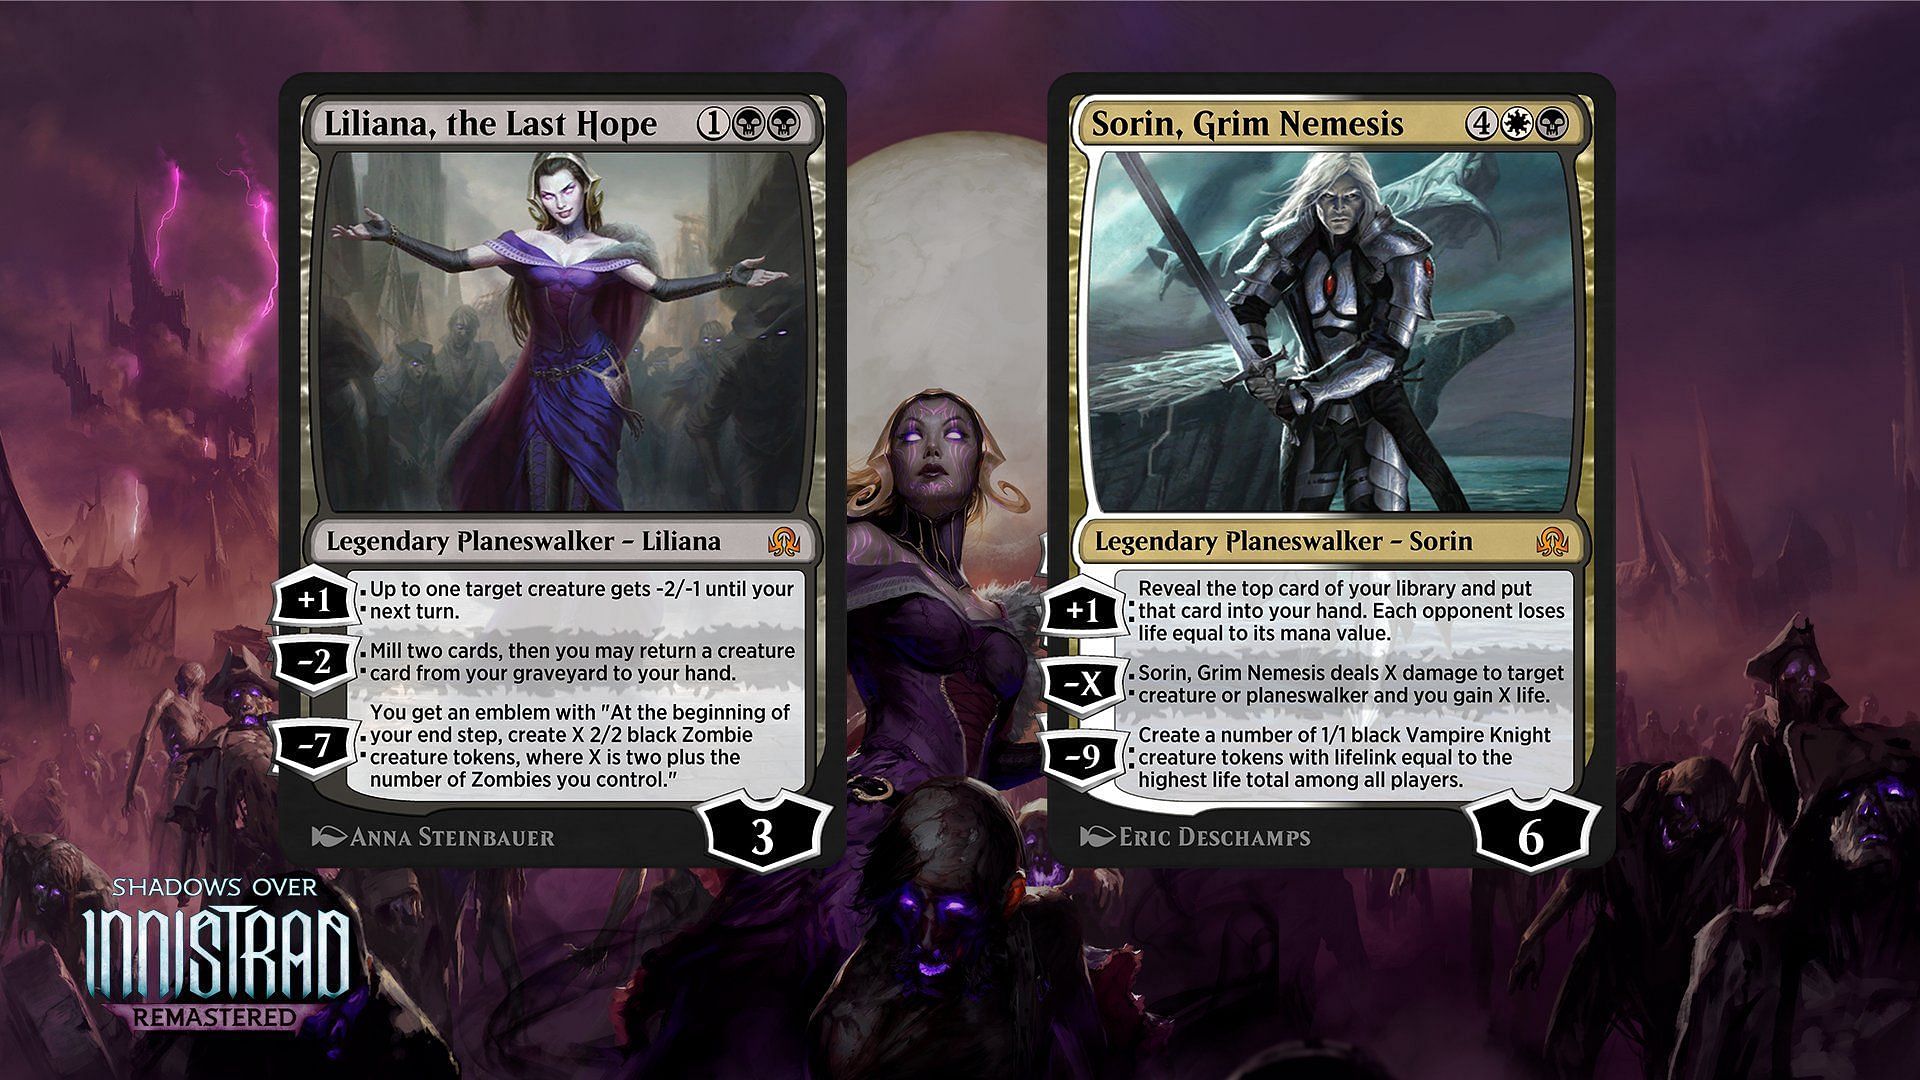 Two powerful planeswalkers return in Shadows Over Innistrad Remastered in Magic: The Gathering Arena.